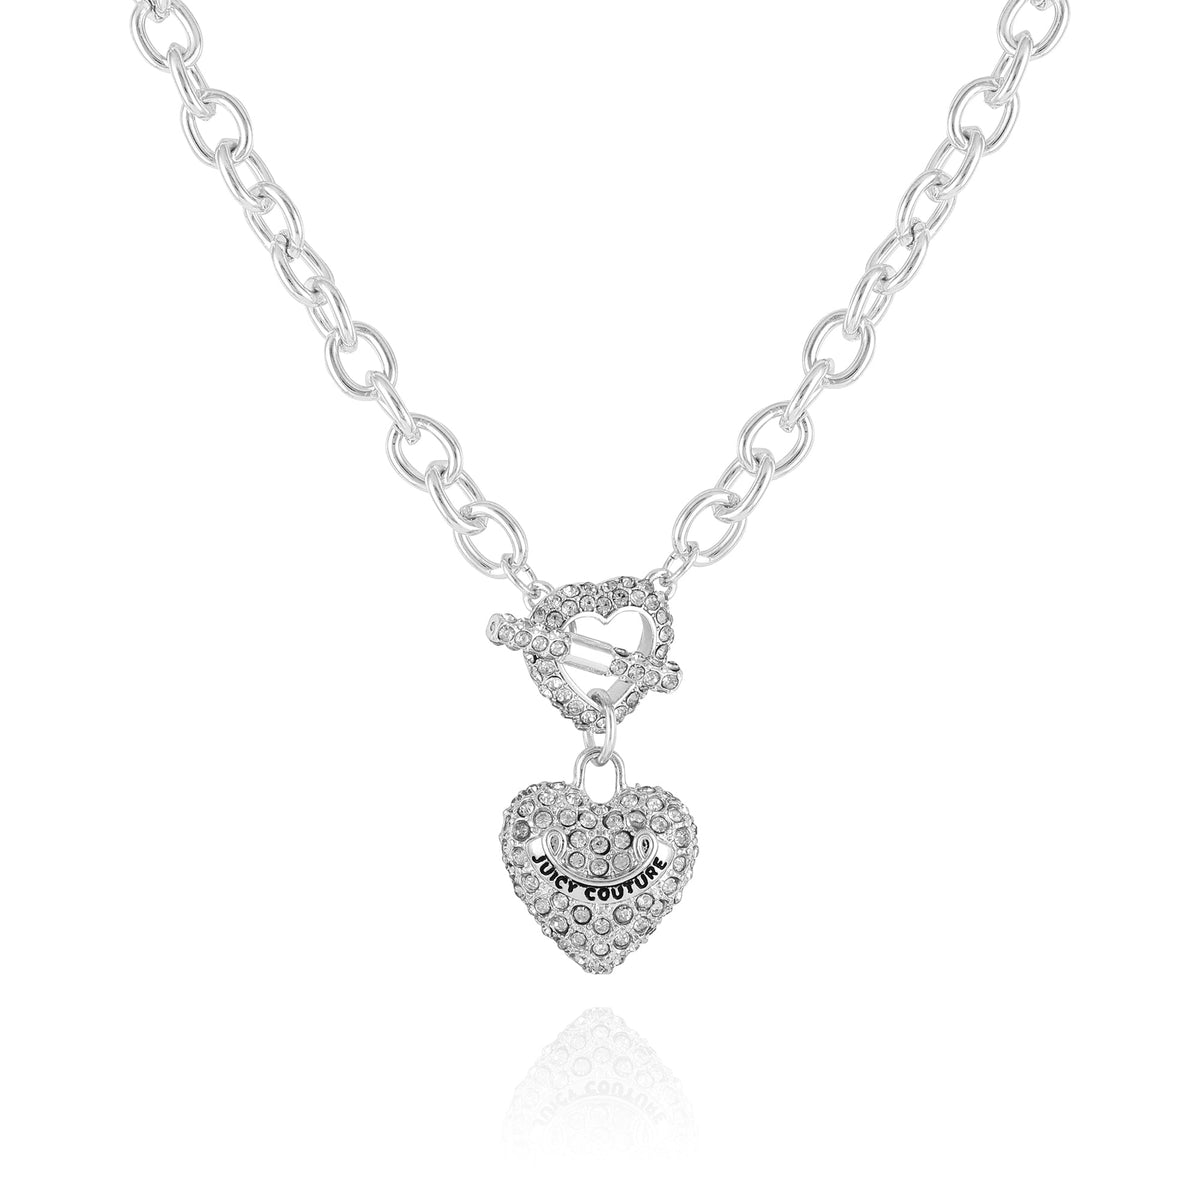 Juicy Couture Bling Heart Pendant Charm Necklace Silver